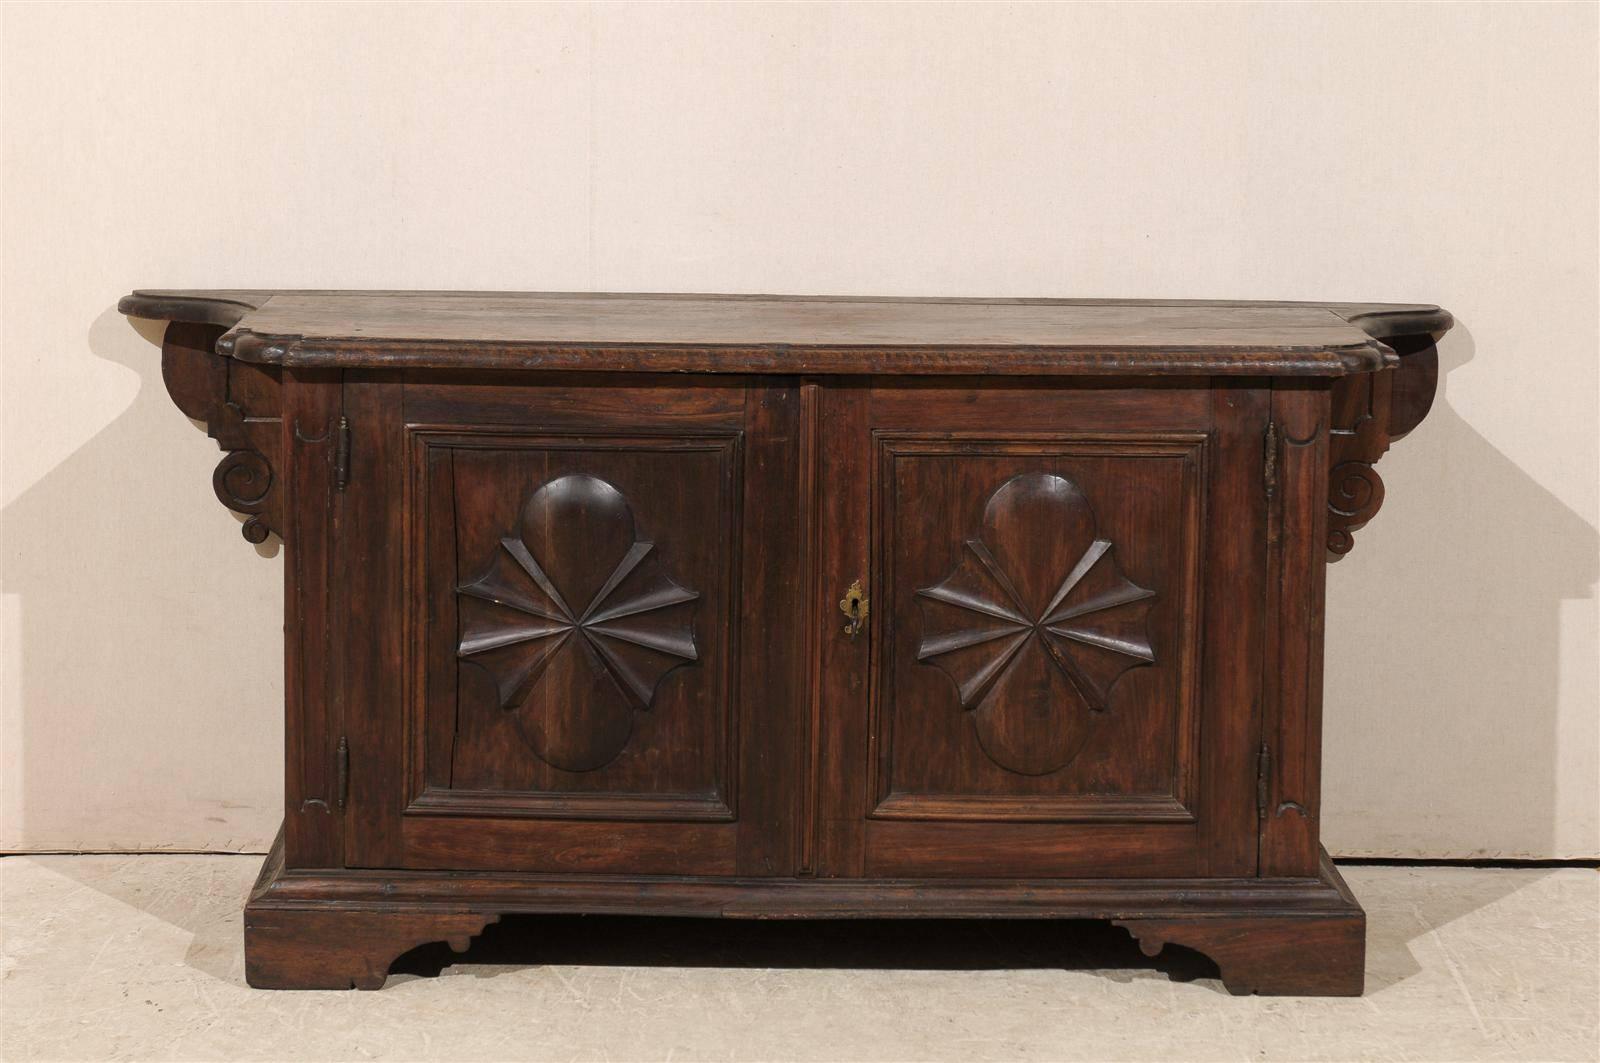 An exquisite 18th century Italian credenza / sideboard of deep brown colored walnut.  This piece features carved patterns including sun-rays on either door and either side panel.  The back of the credenza ends in a beautiful set of volutes and the